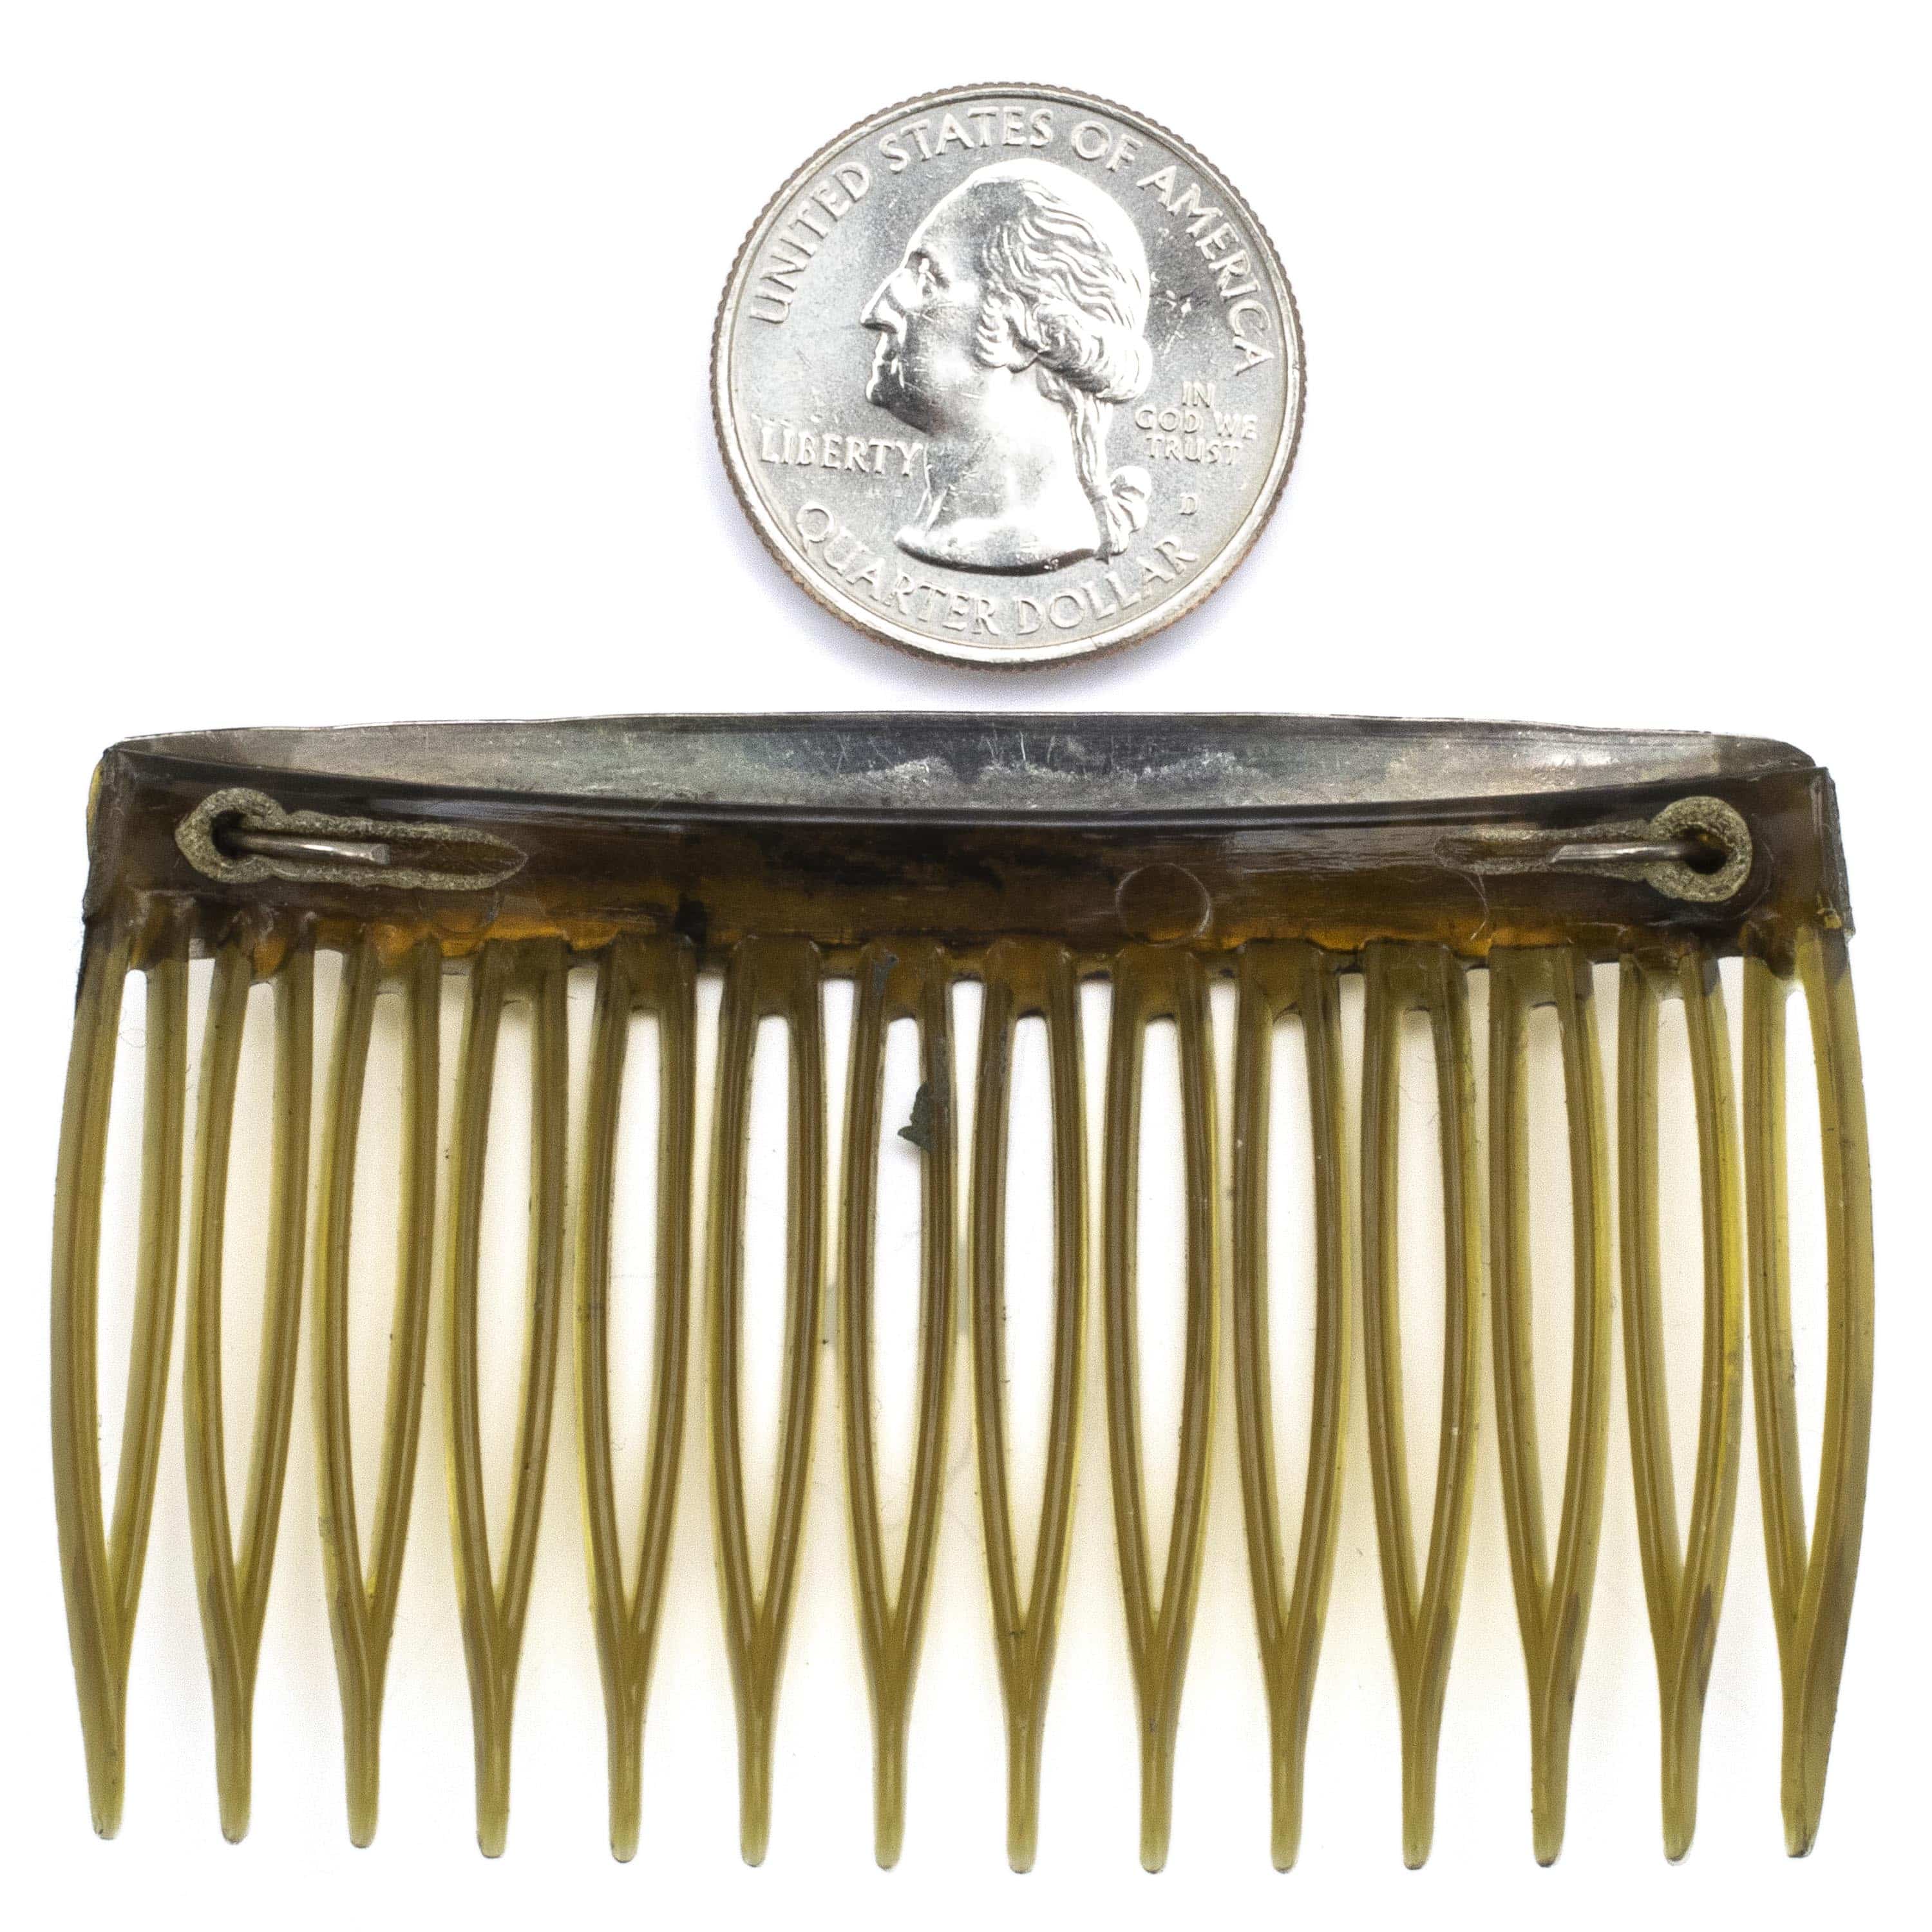 Kalifano Native American Jewelry 925 Sterling Silver USA Native American Made Hair Comb NA150.006